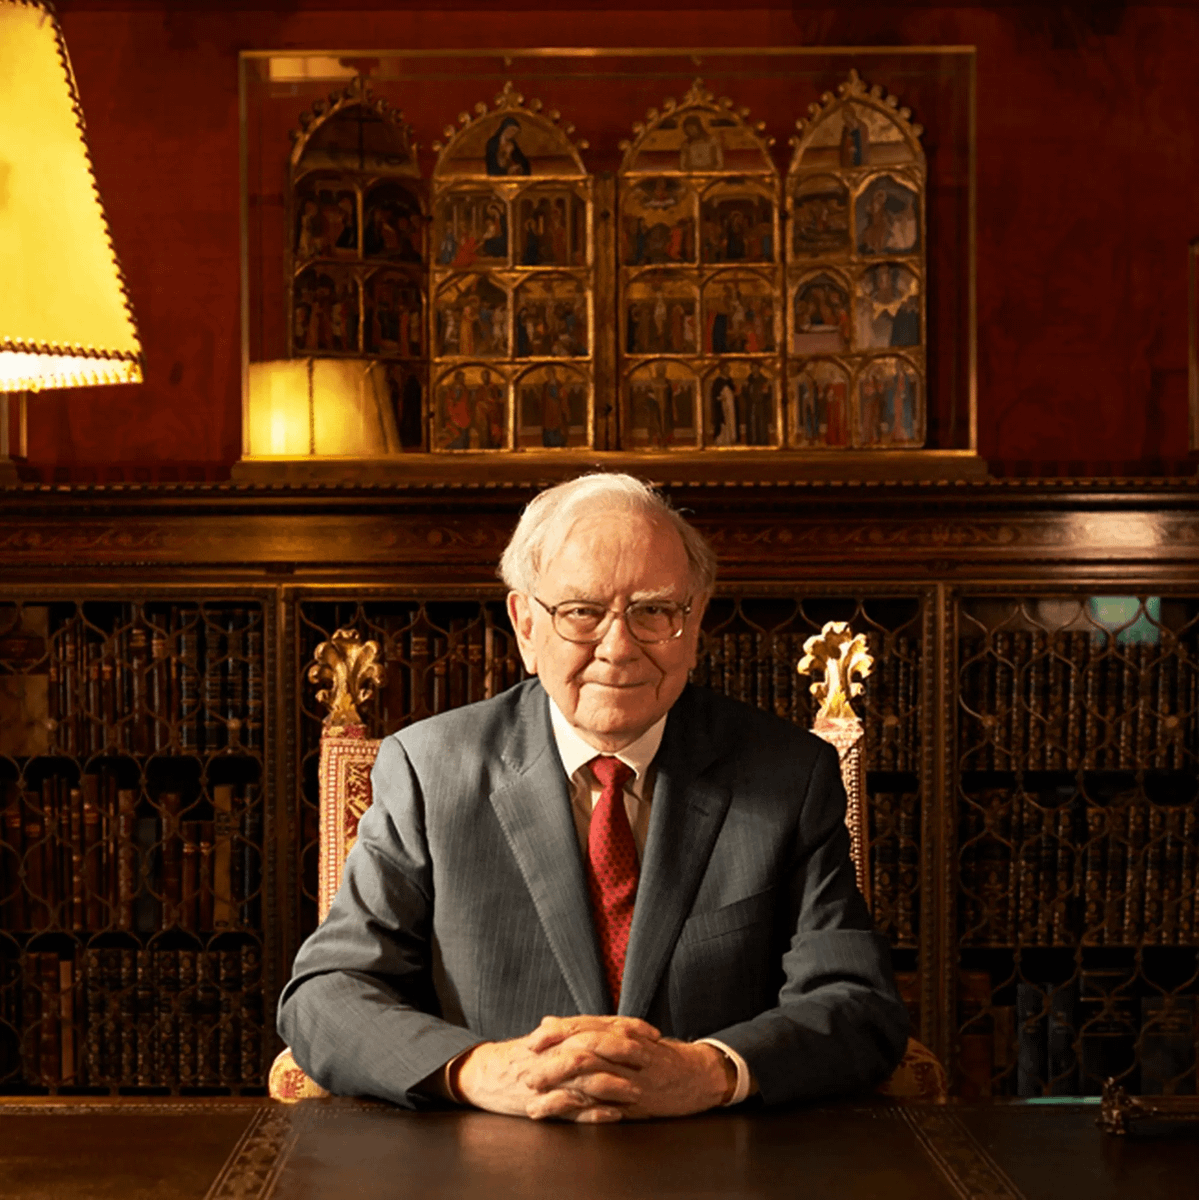 Warren Buffet 93 years old investment genius still invests every day. He's been investing in the market for 82 years and knows how to do it Follow his rules to make 6-figures this year🧵👇